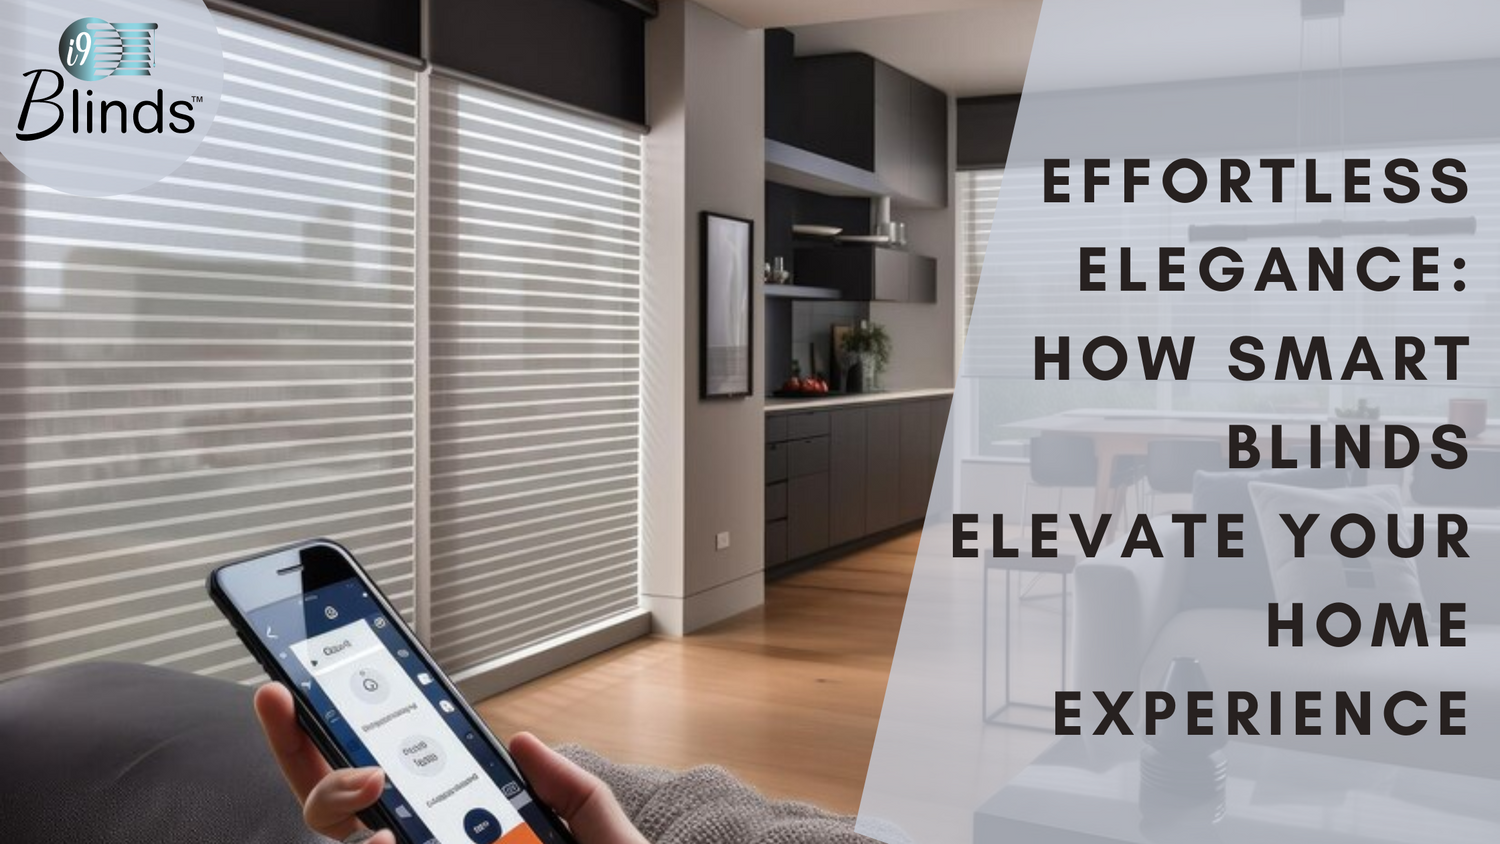 Effortless Elegance: How Smart Blinds Elevate Your Home Experience